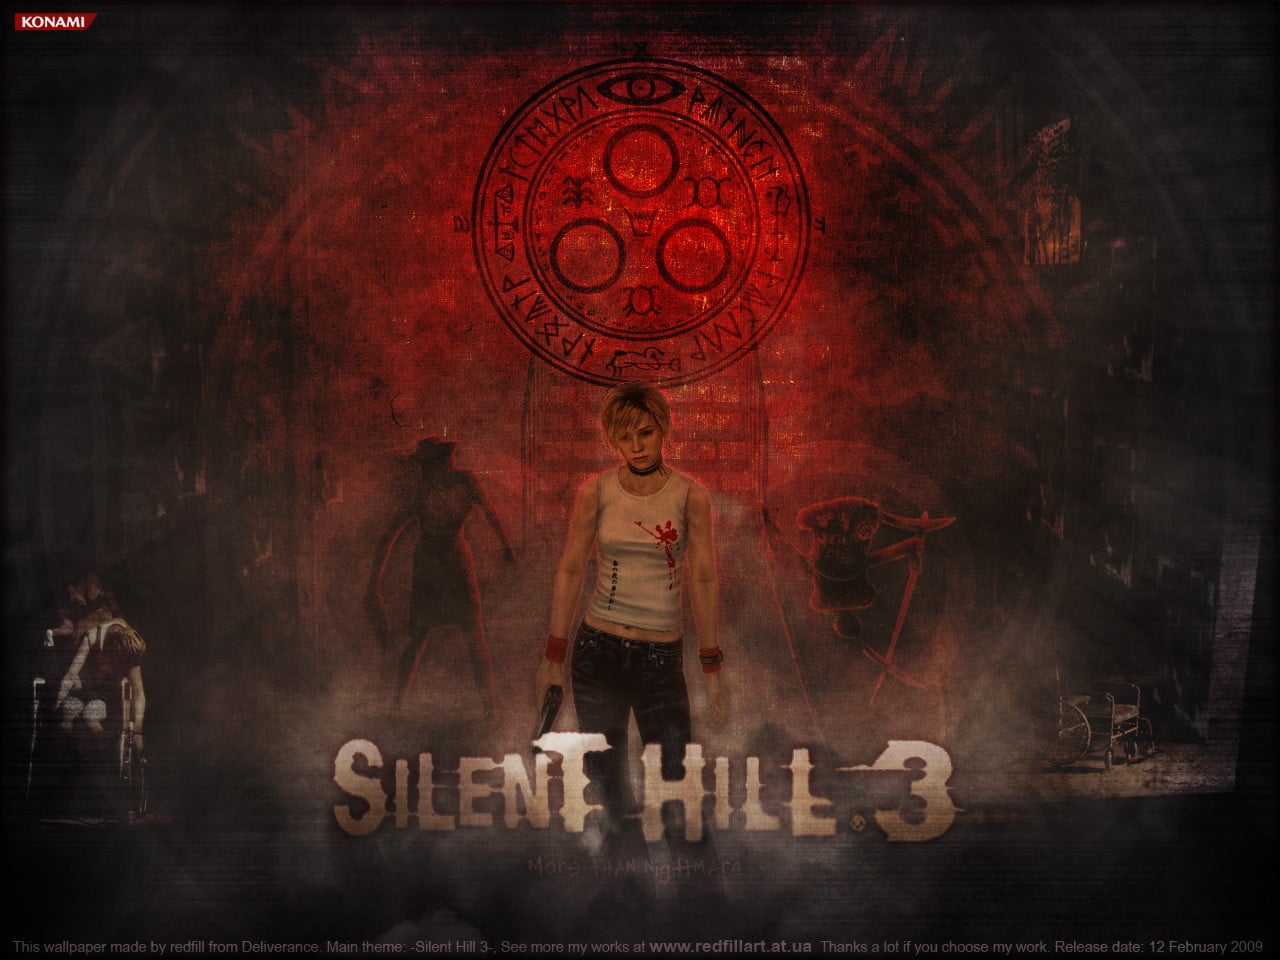 Silent Hill 3 wallpaper, heather mason, video games, one person